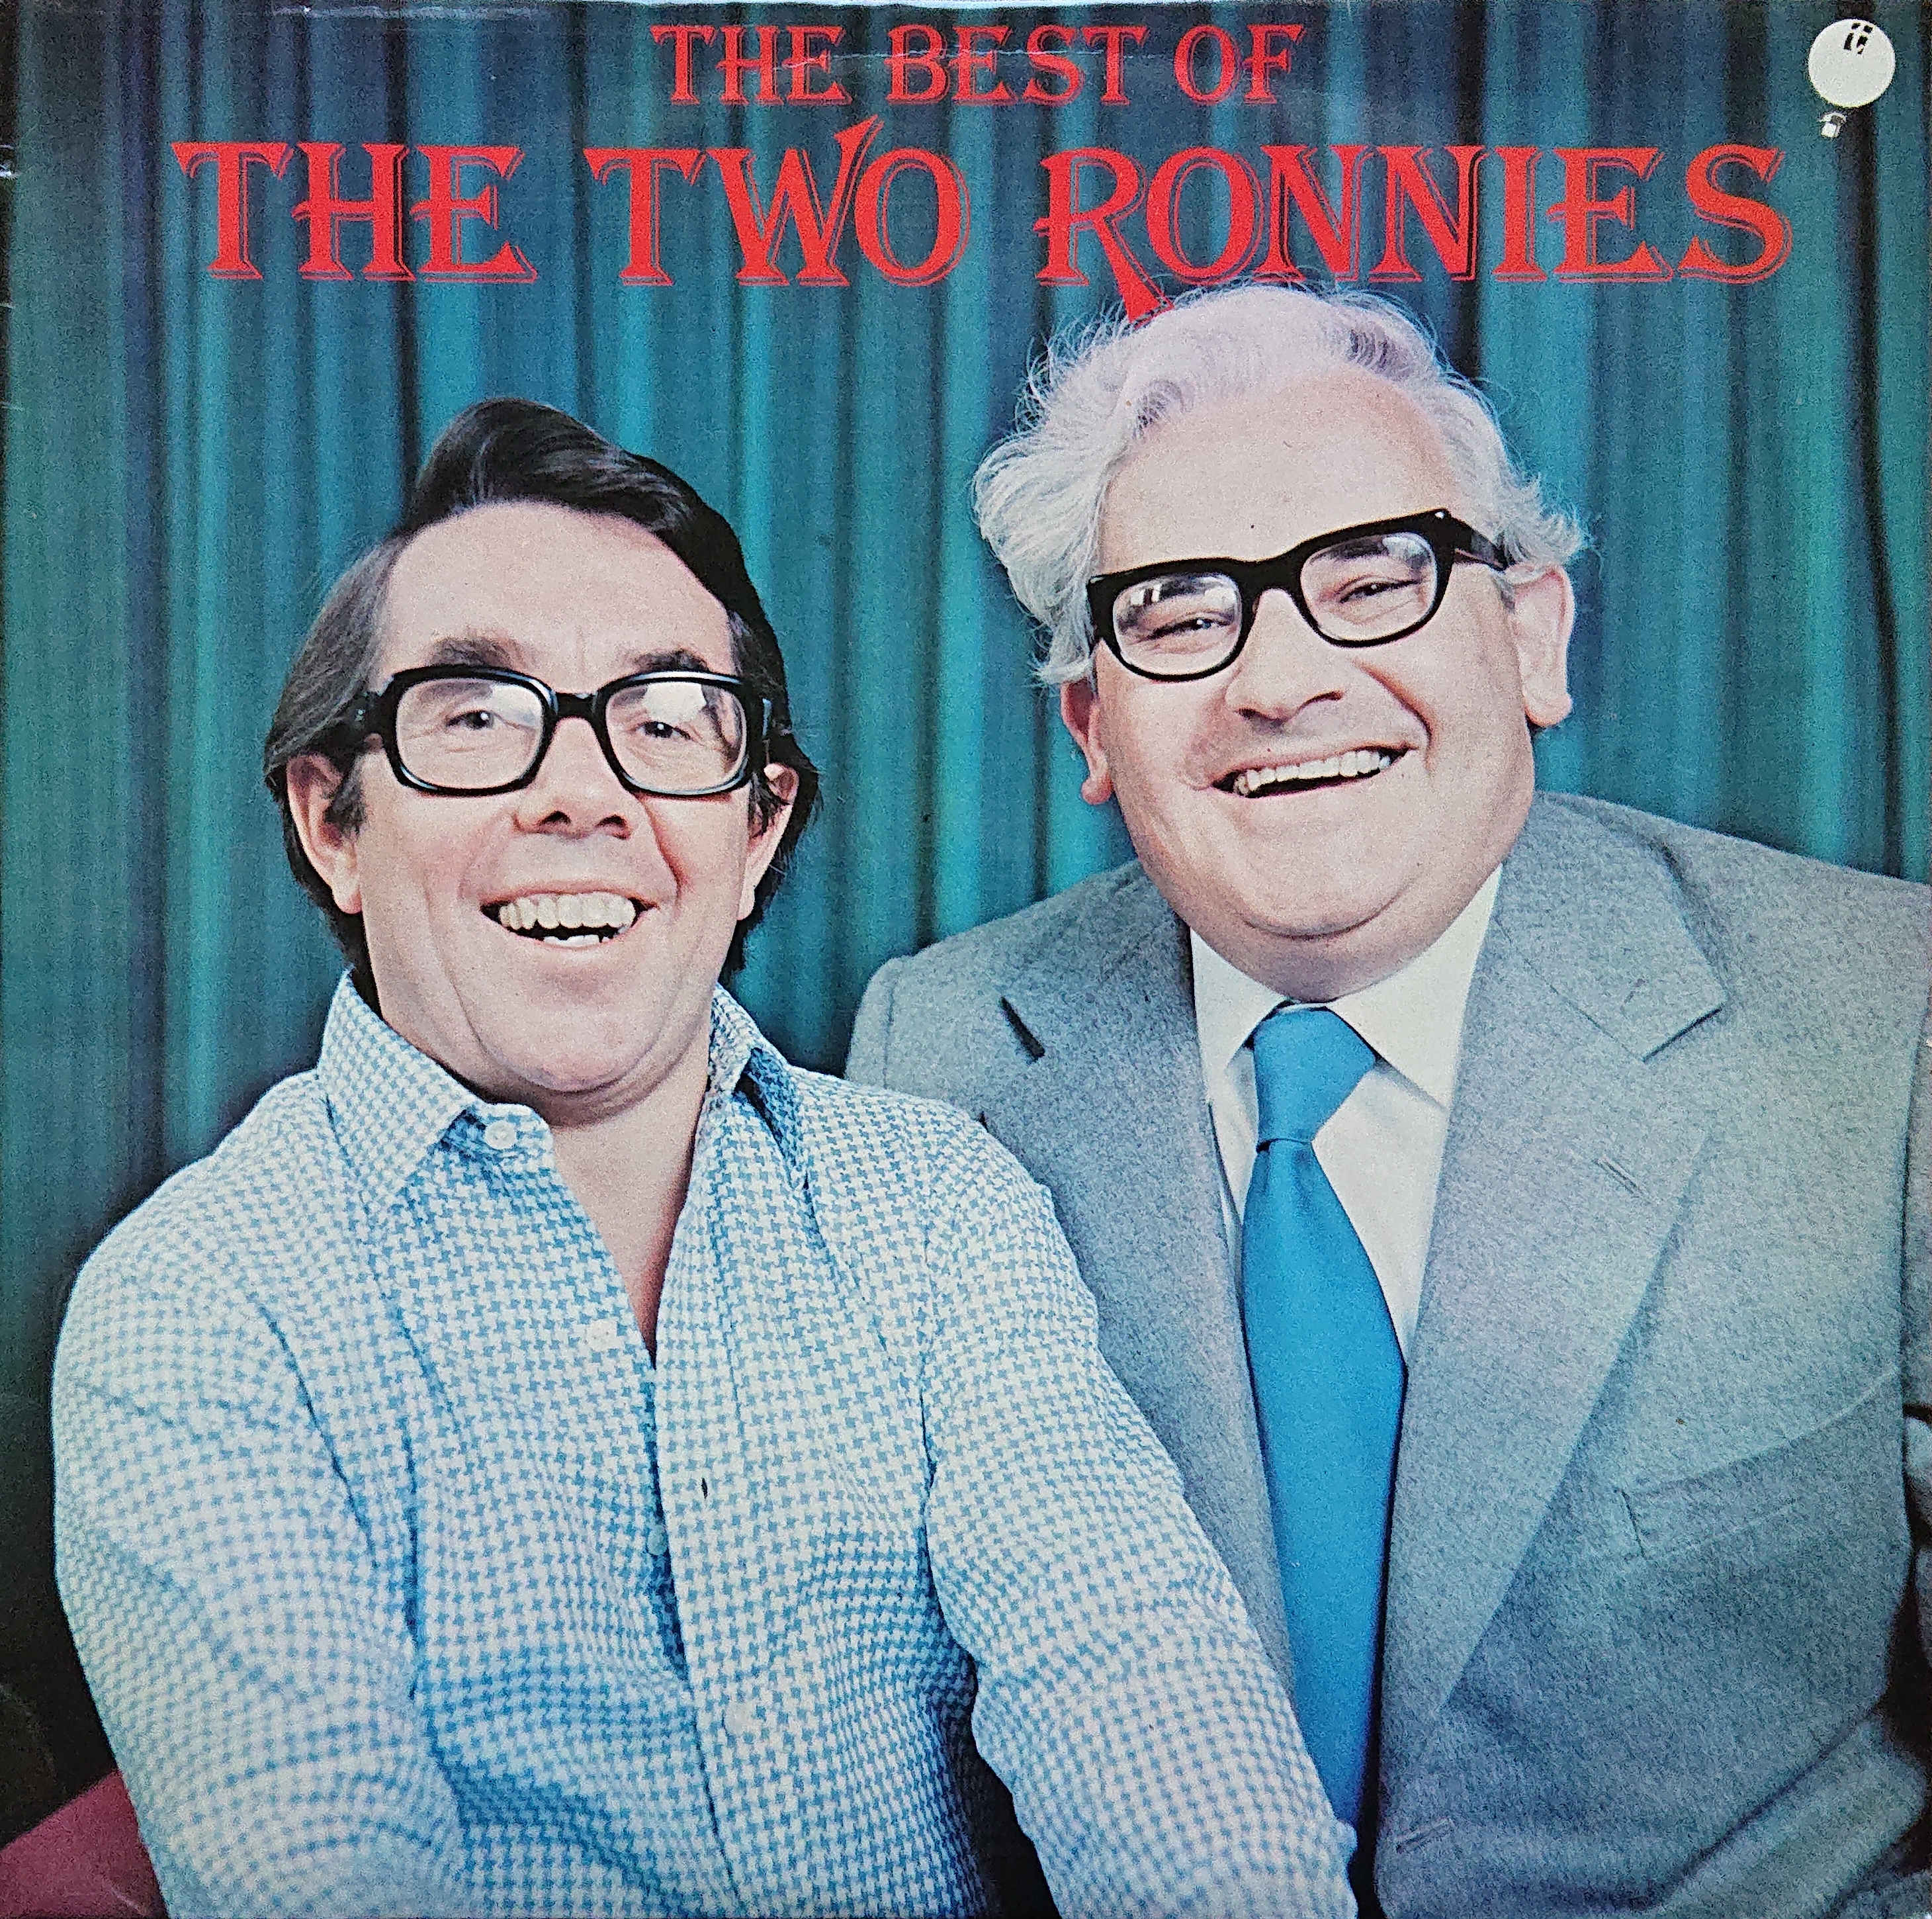 Picture of TRA 328 The best of the Two Ronnies by artist Barker / Vosburgh / Blackburn from the BBC albums - Records and Tapes library